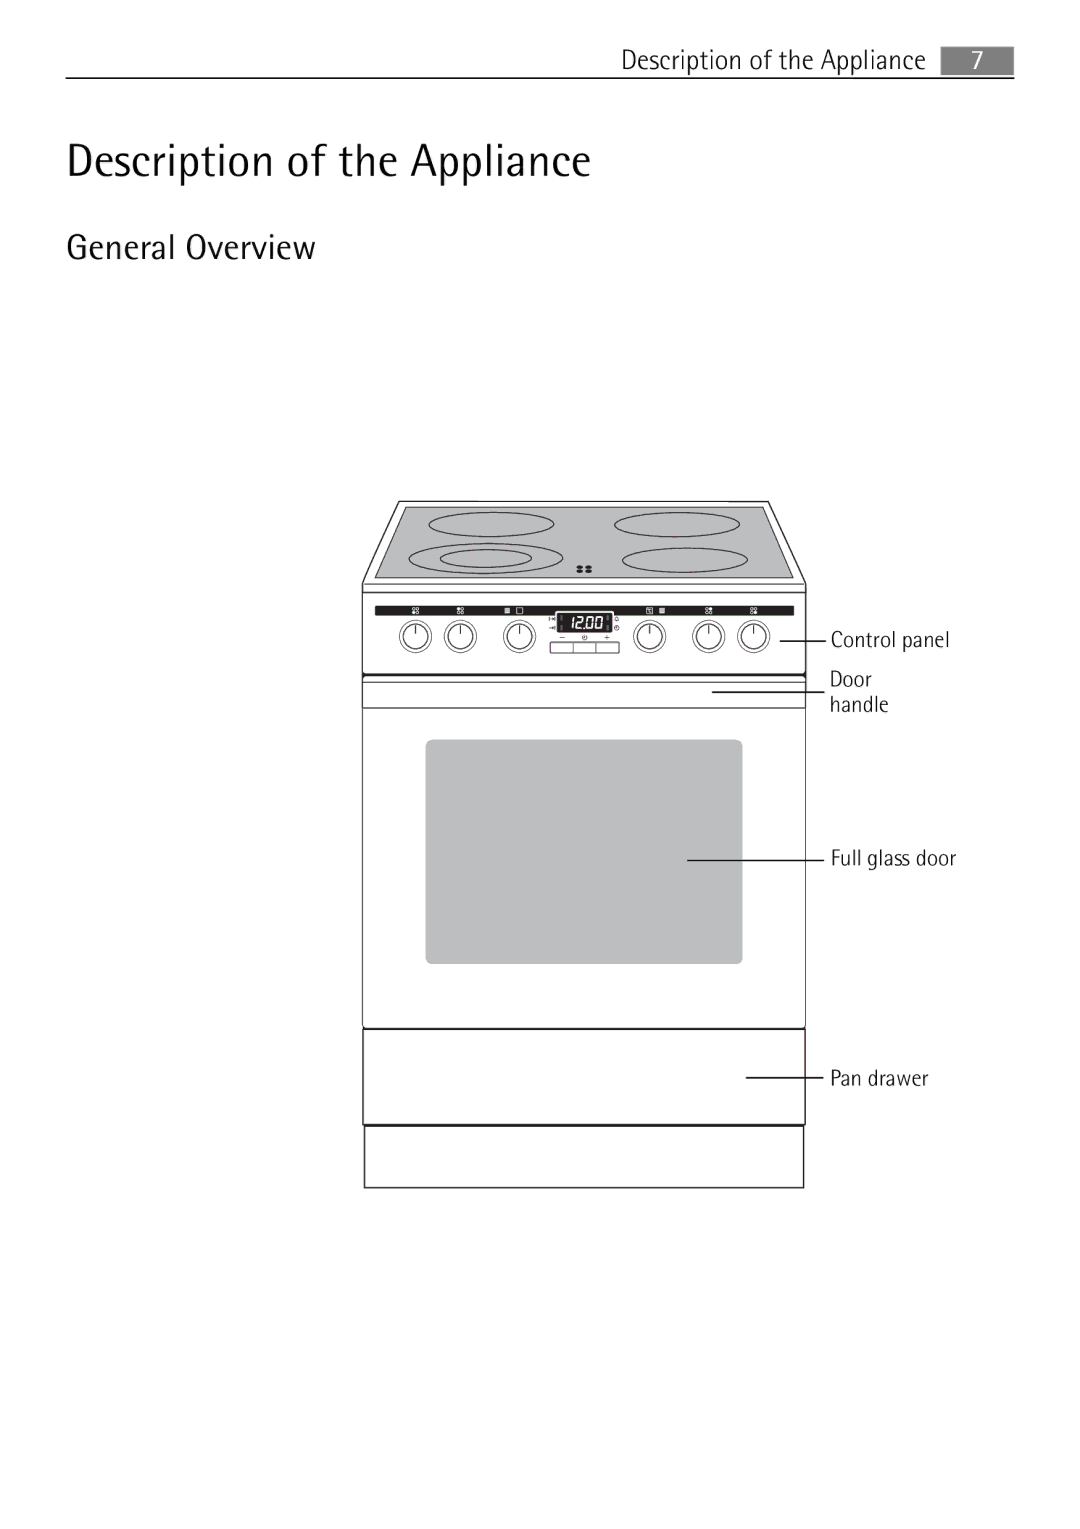 Electrolux 41056VH user manual Description of the Appliance, General Overview 